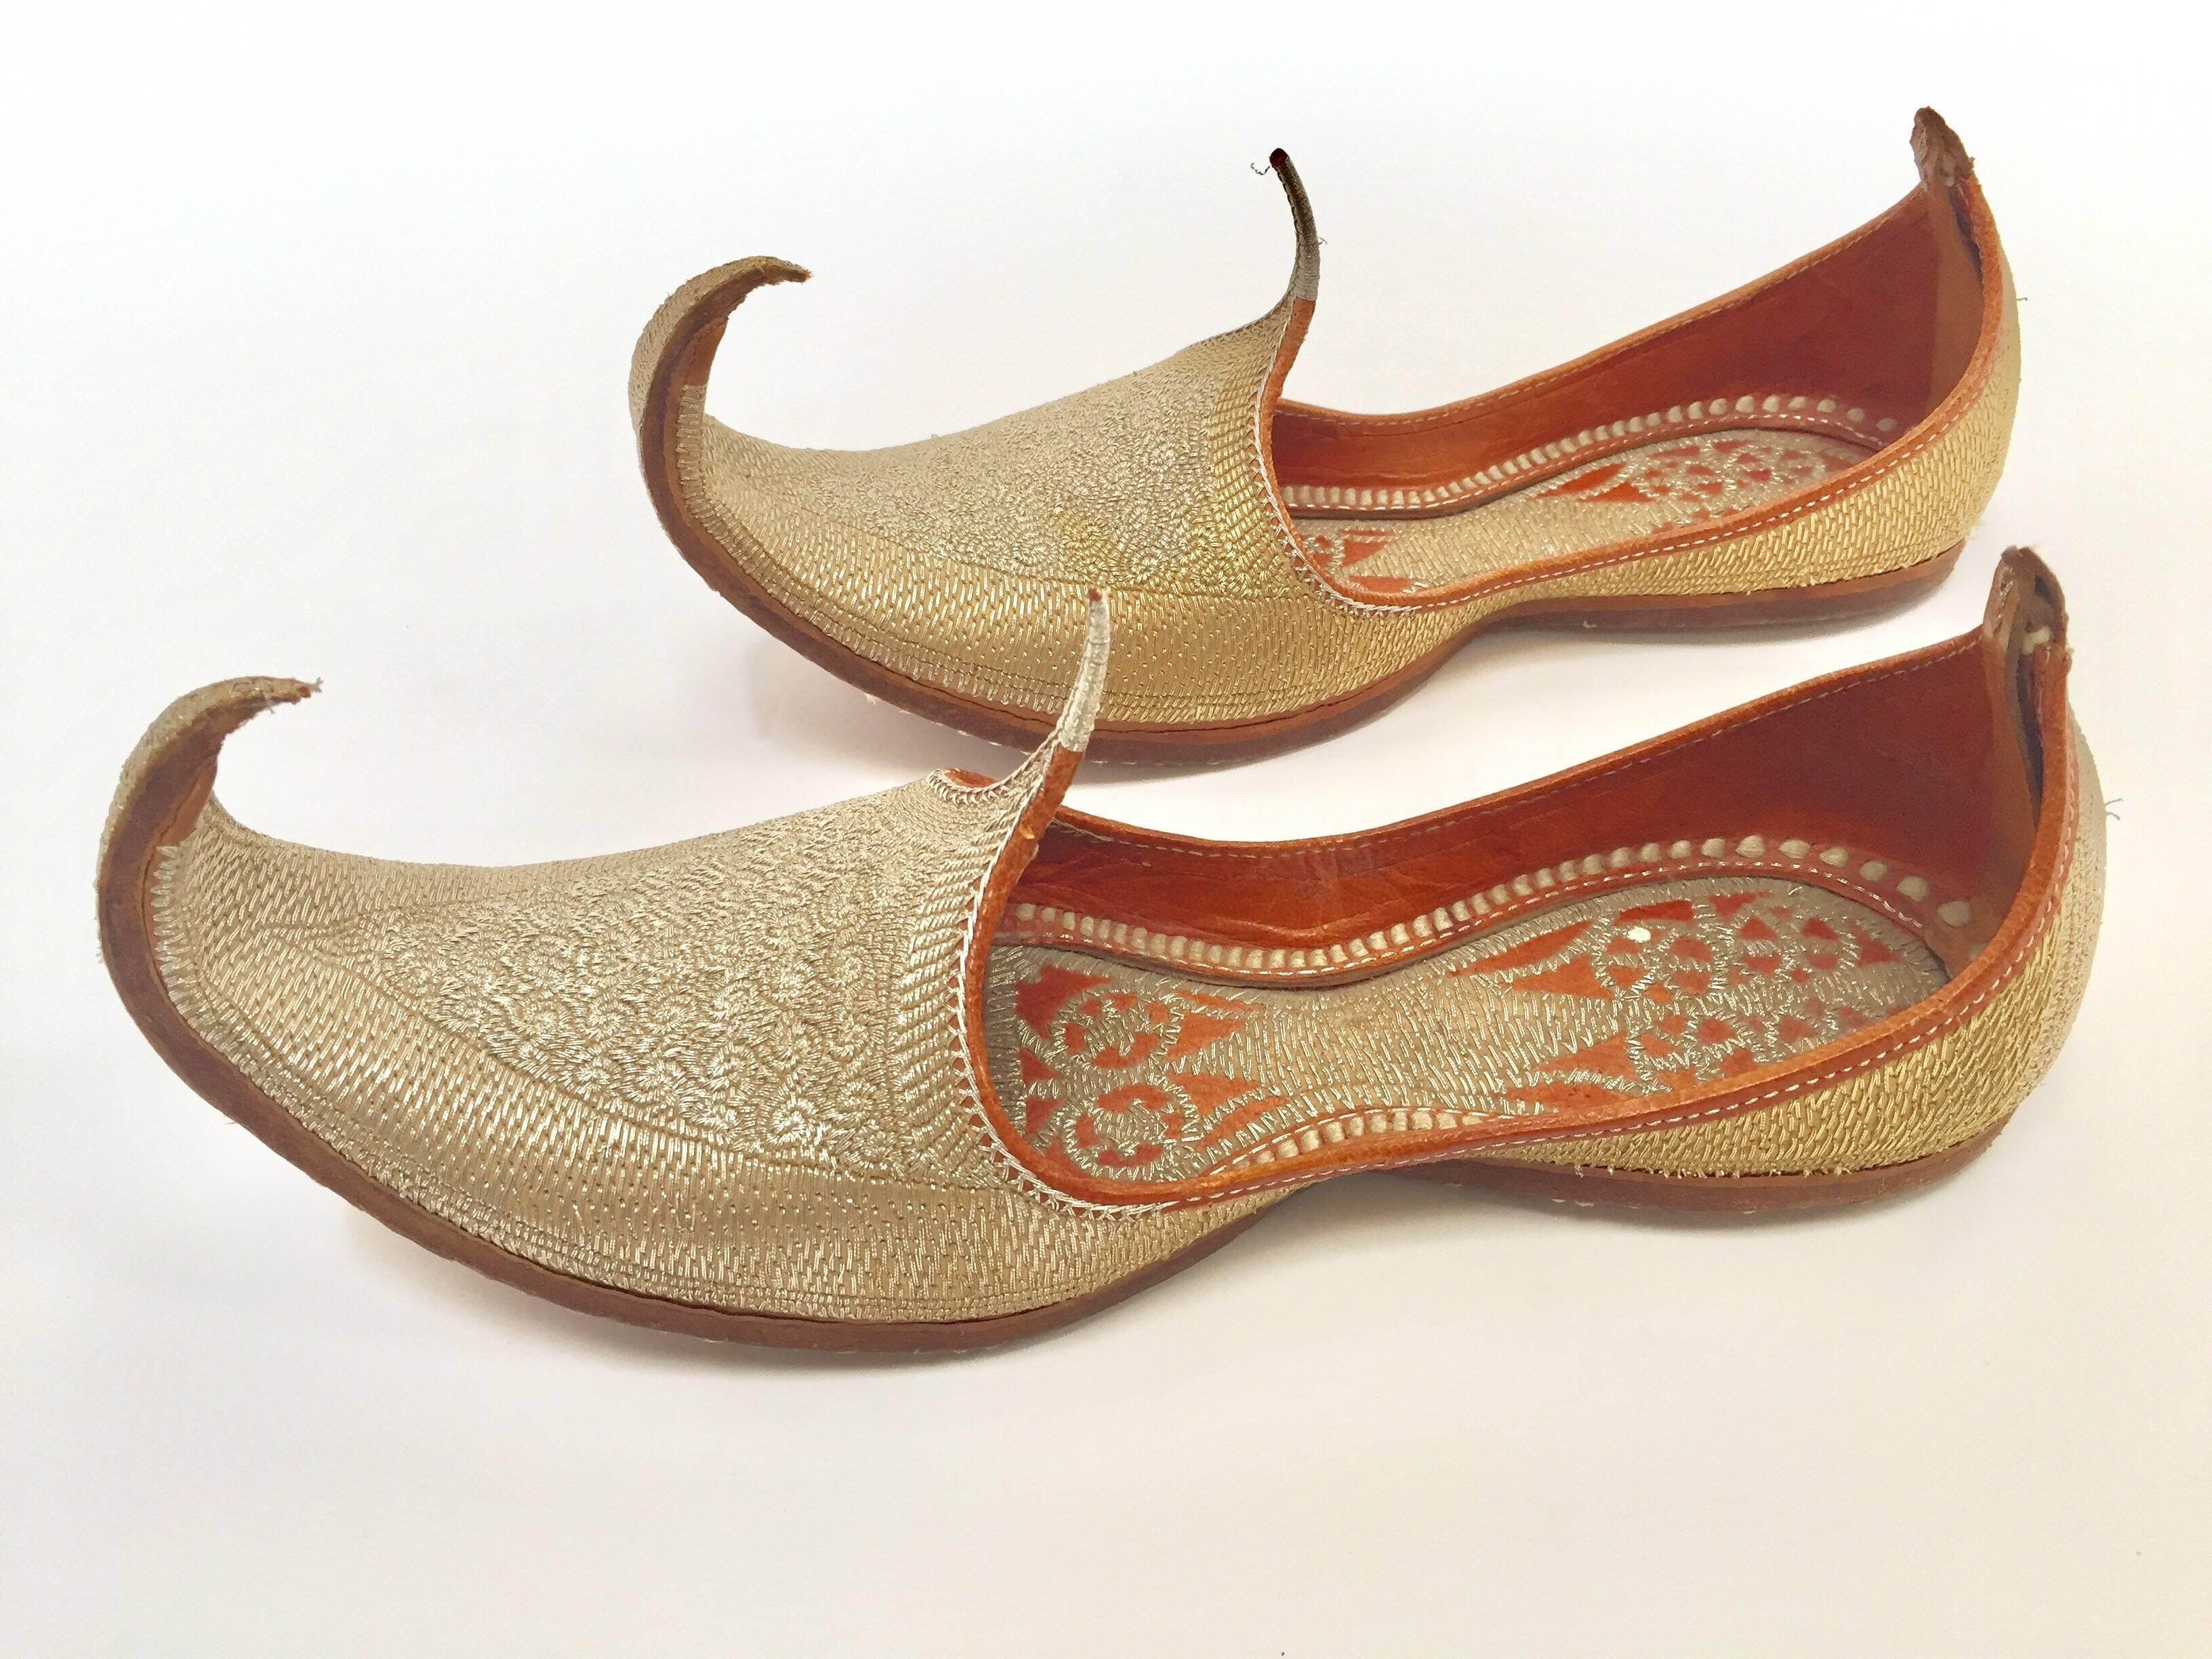 A pair of rare late 19th century hand stitched and hand tooled leather shoes with hand embroidered with gilt metallic threads.
Amazing antique Mughal gold embroidered traditional Islamic Indian leather shoes fit for a Maharaja. 
Arabic Persian